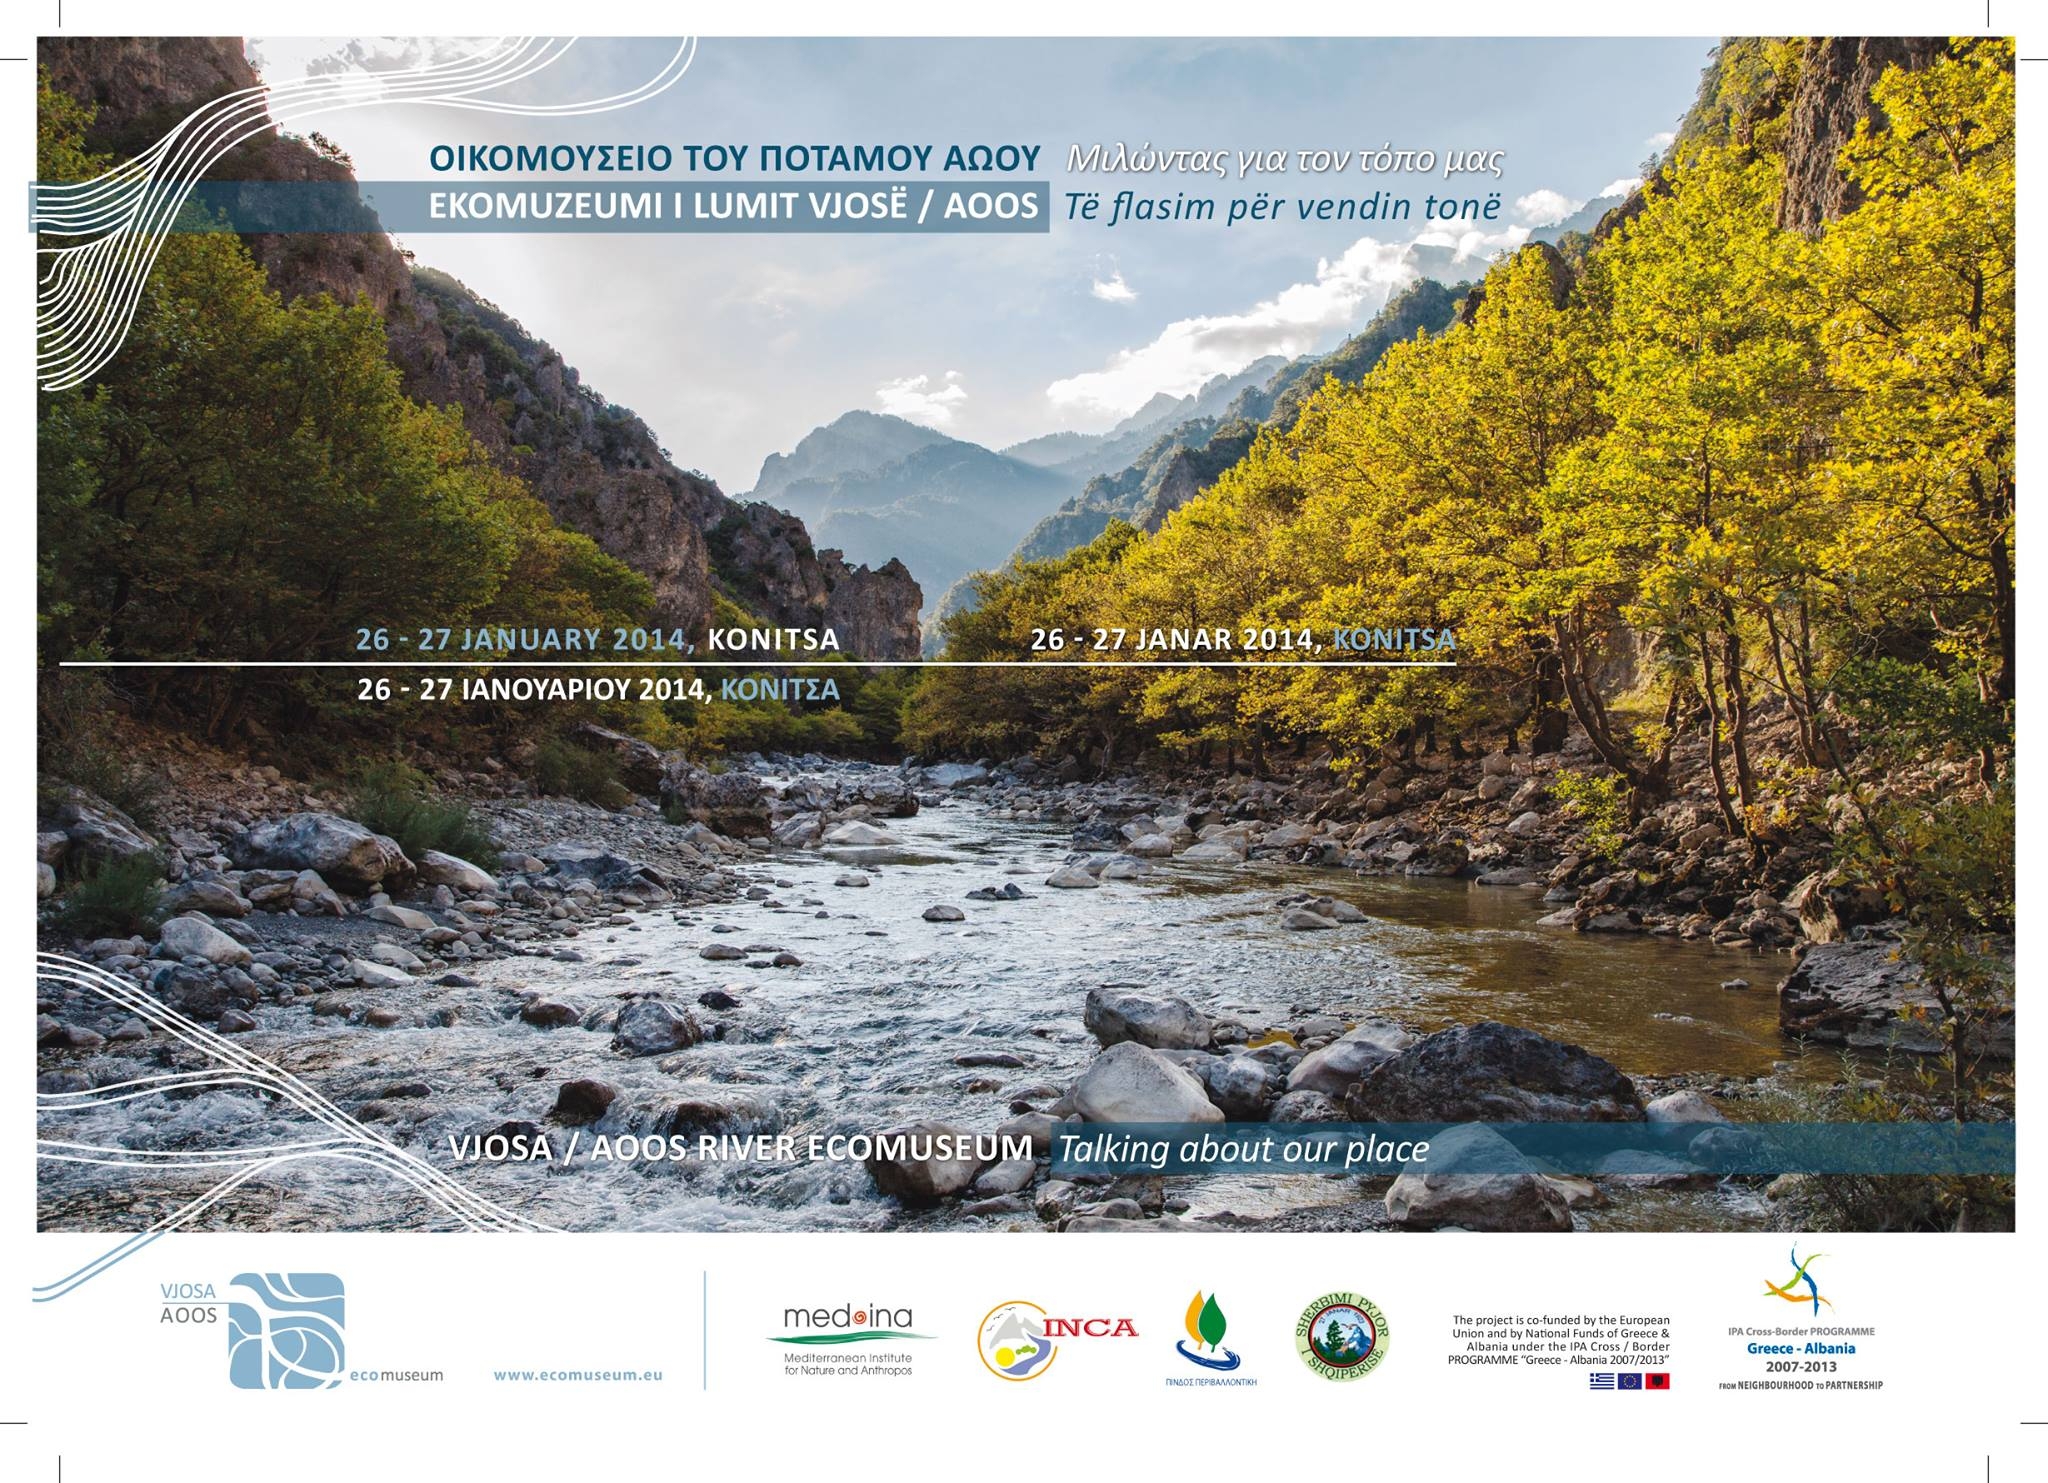 The Vjosa/Aoos River Ecomuseum International Conference